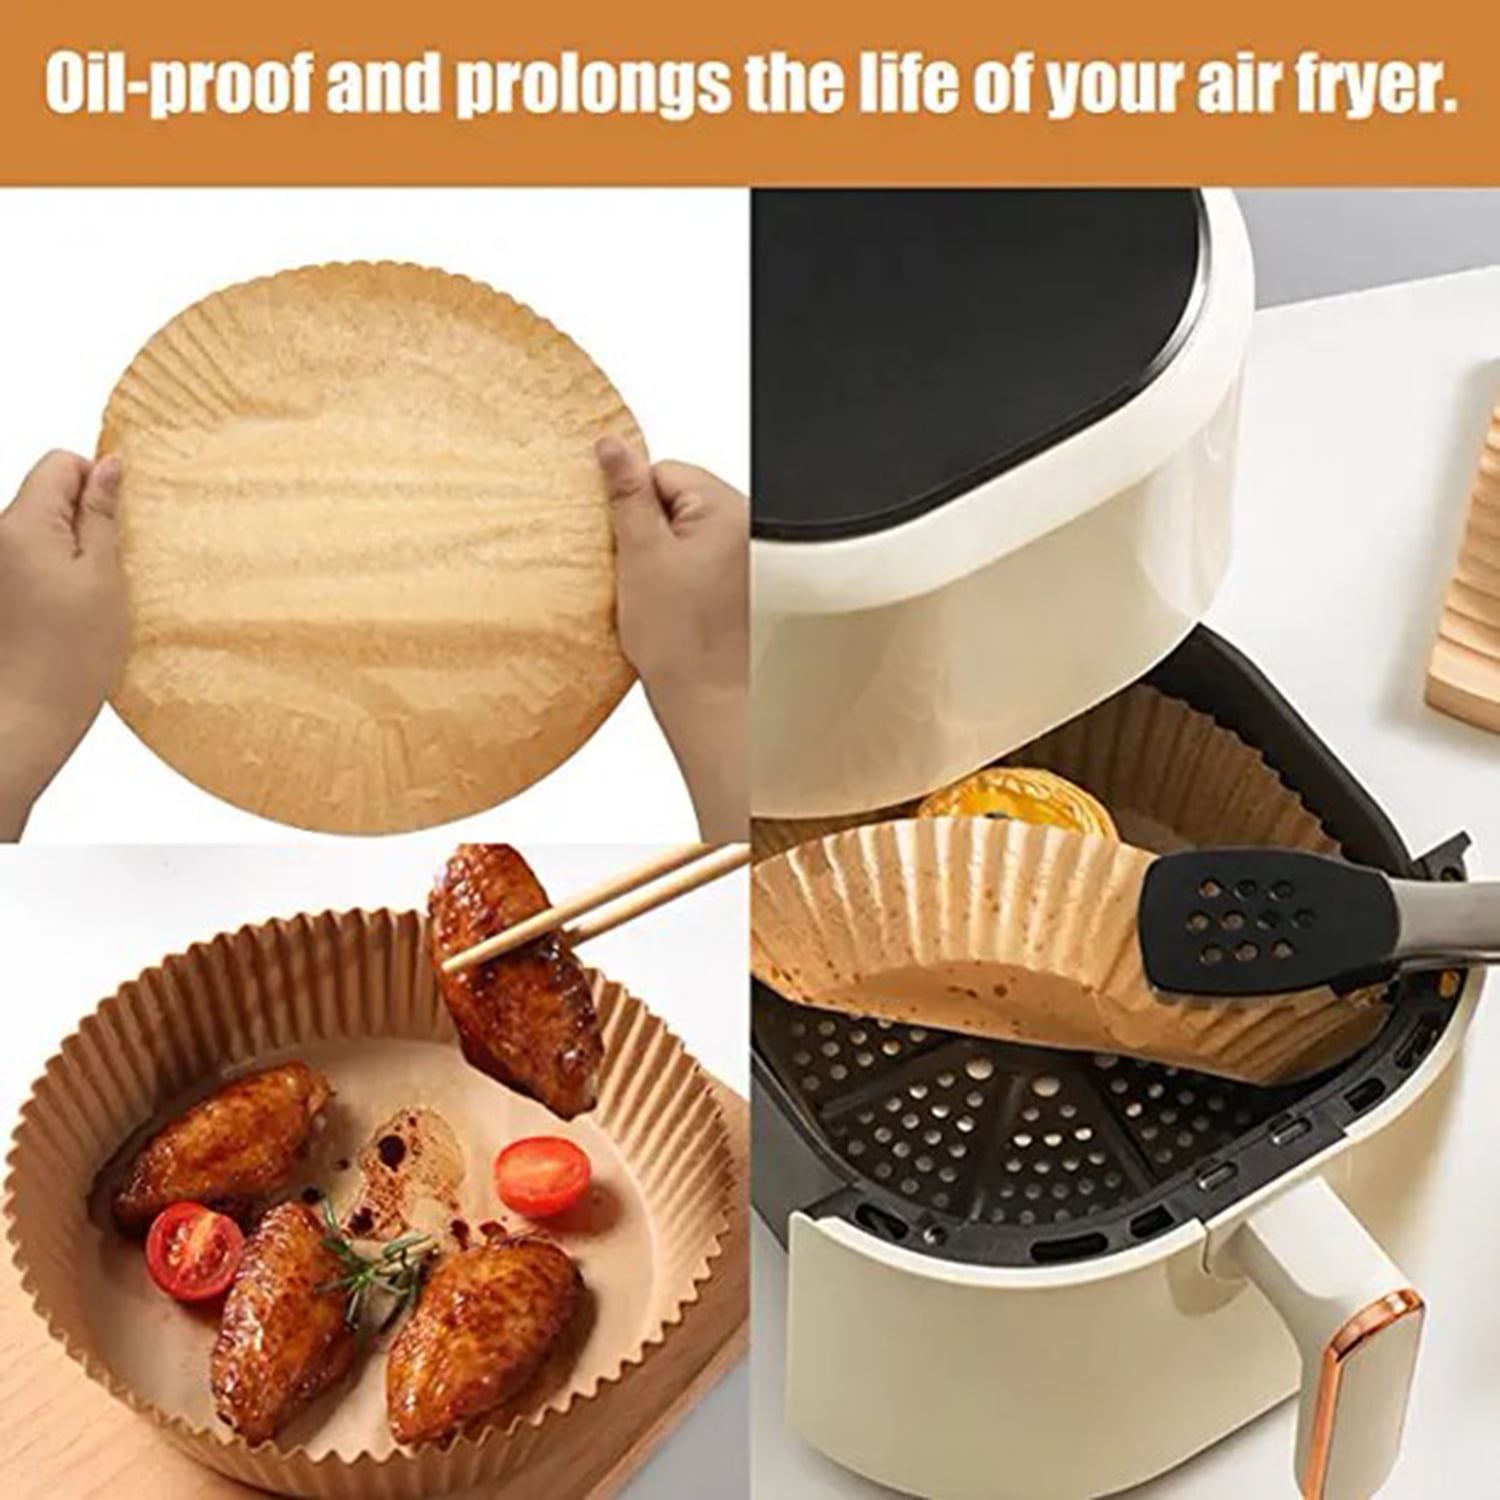 Blazco Air Fryer Disposable Paper Liner, 50 Pieces Air Fryer Parchment  Paper round Liners, 6.3 Inch Non-stick Perforated Parchment Paper Sheets  for